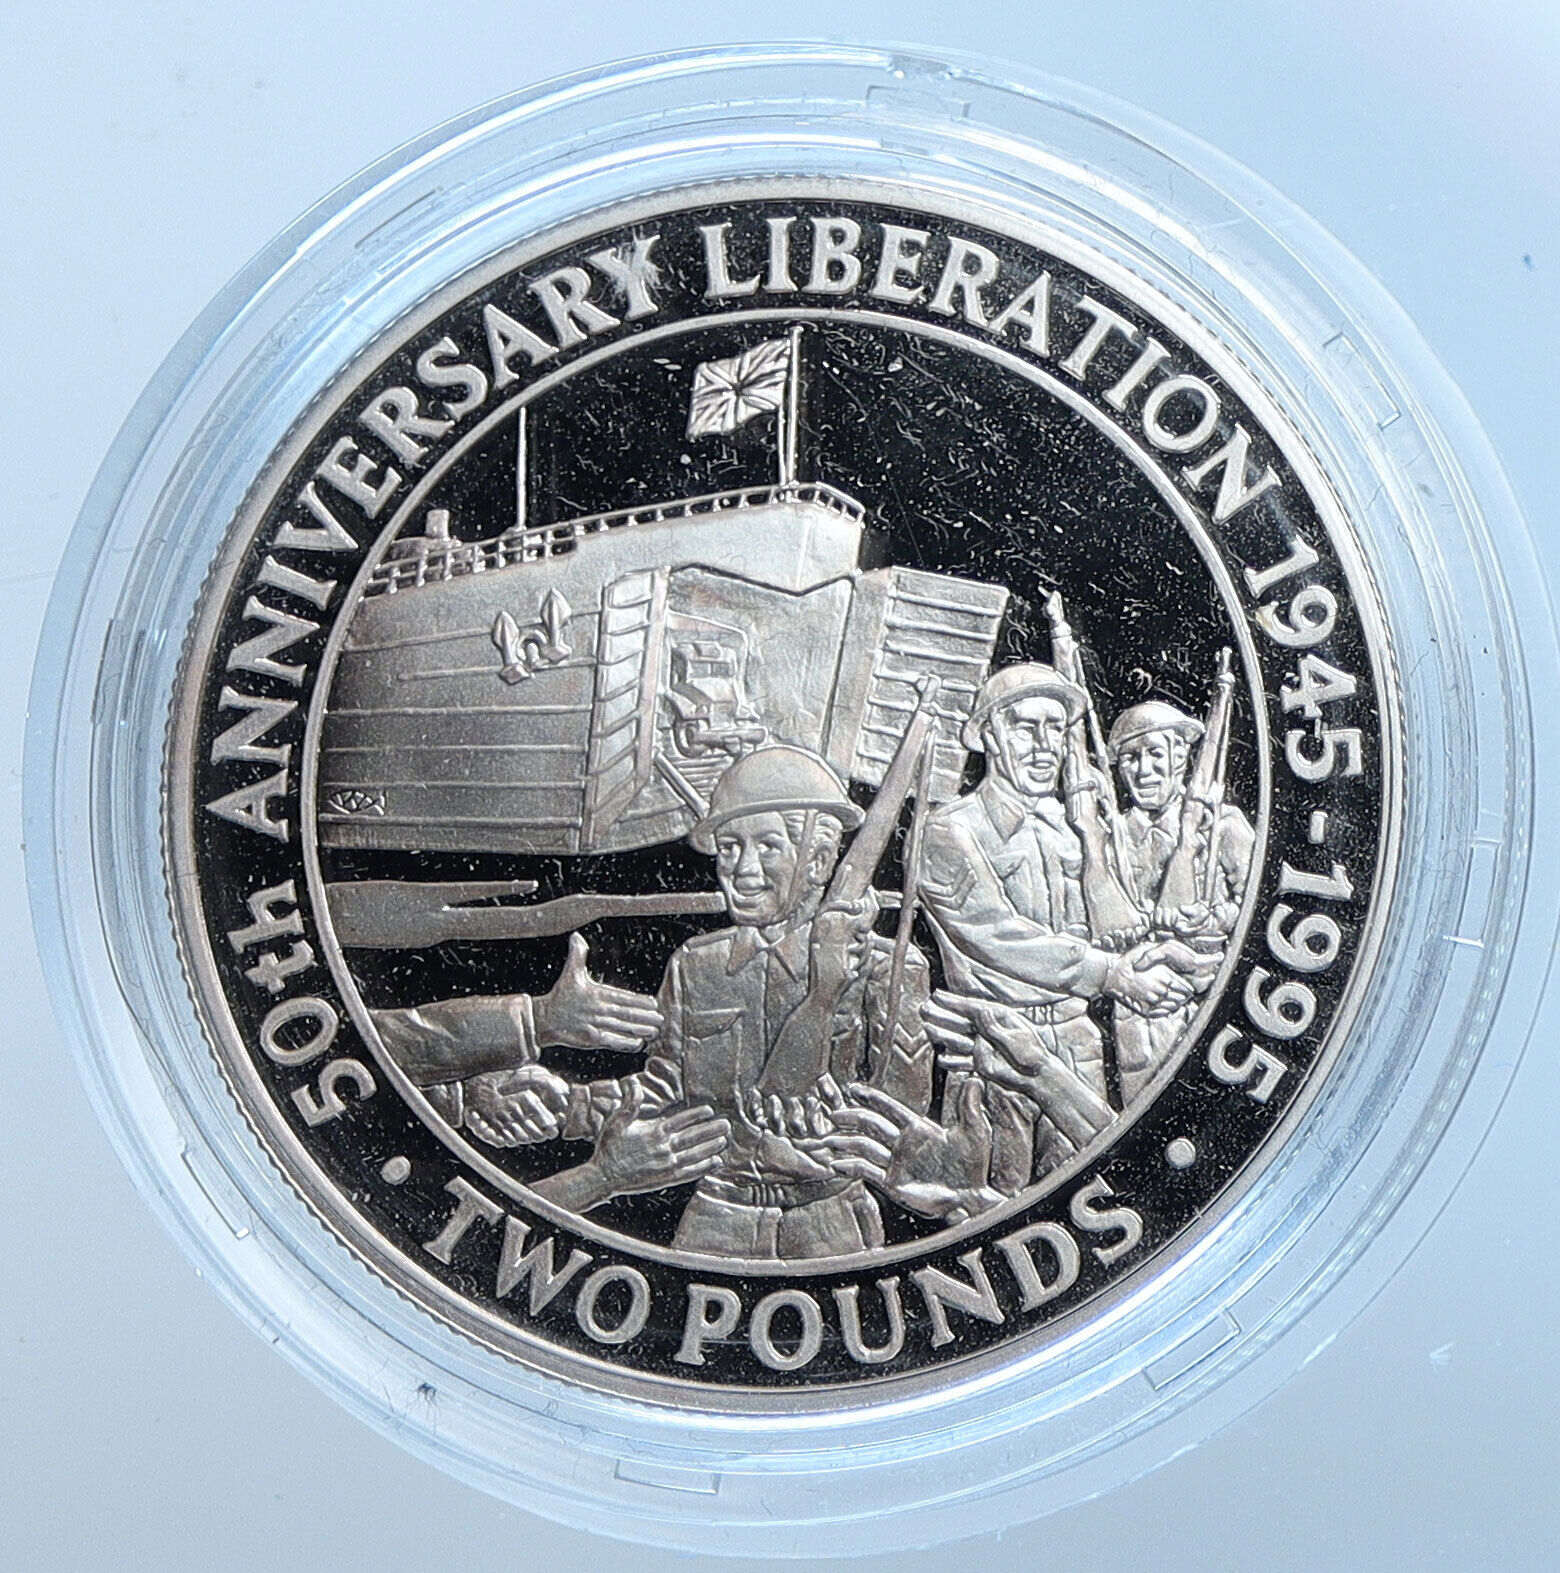 1995 GUERNSEY Island Elizabeth II LIBERATION Proof Silver 2 Pounds Coin i114590